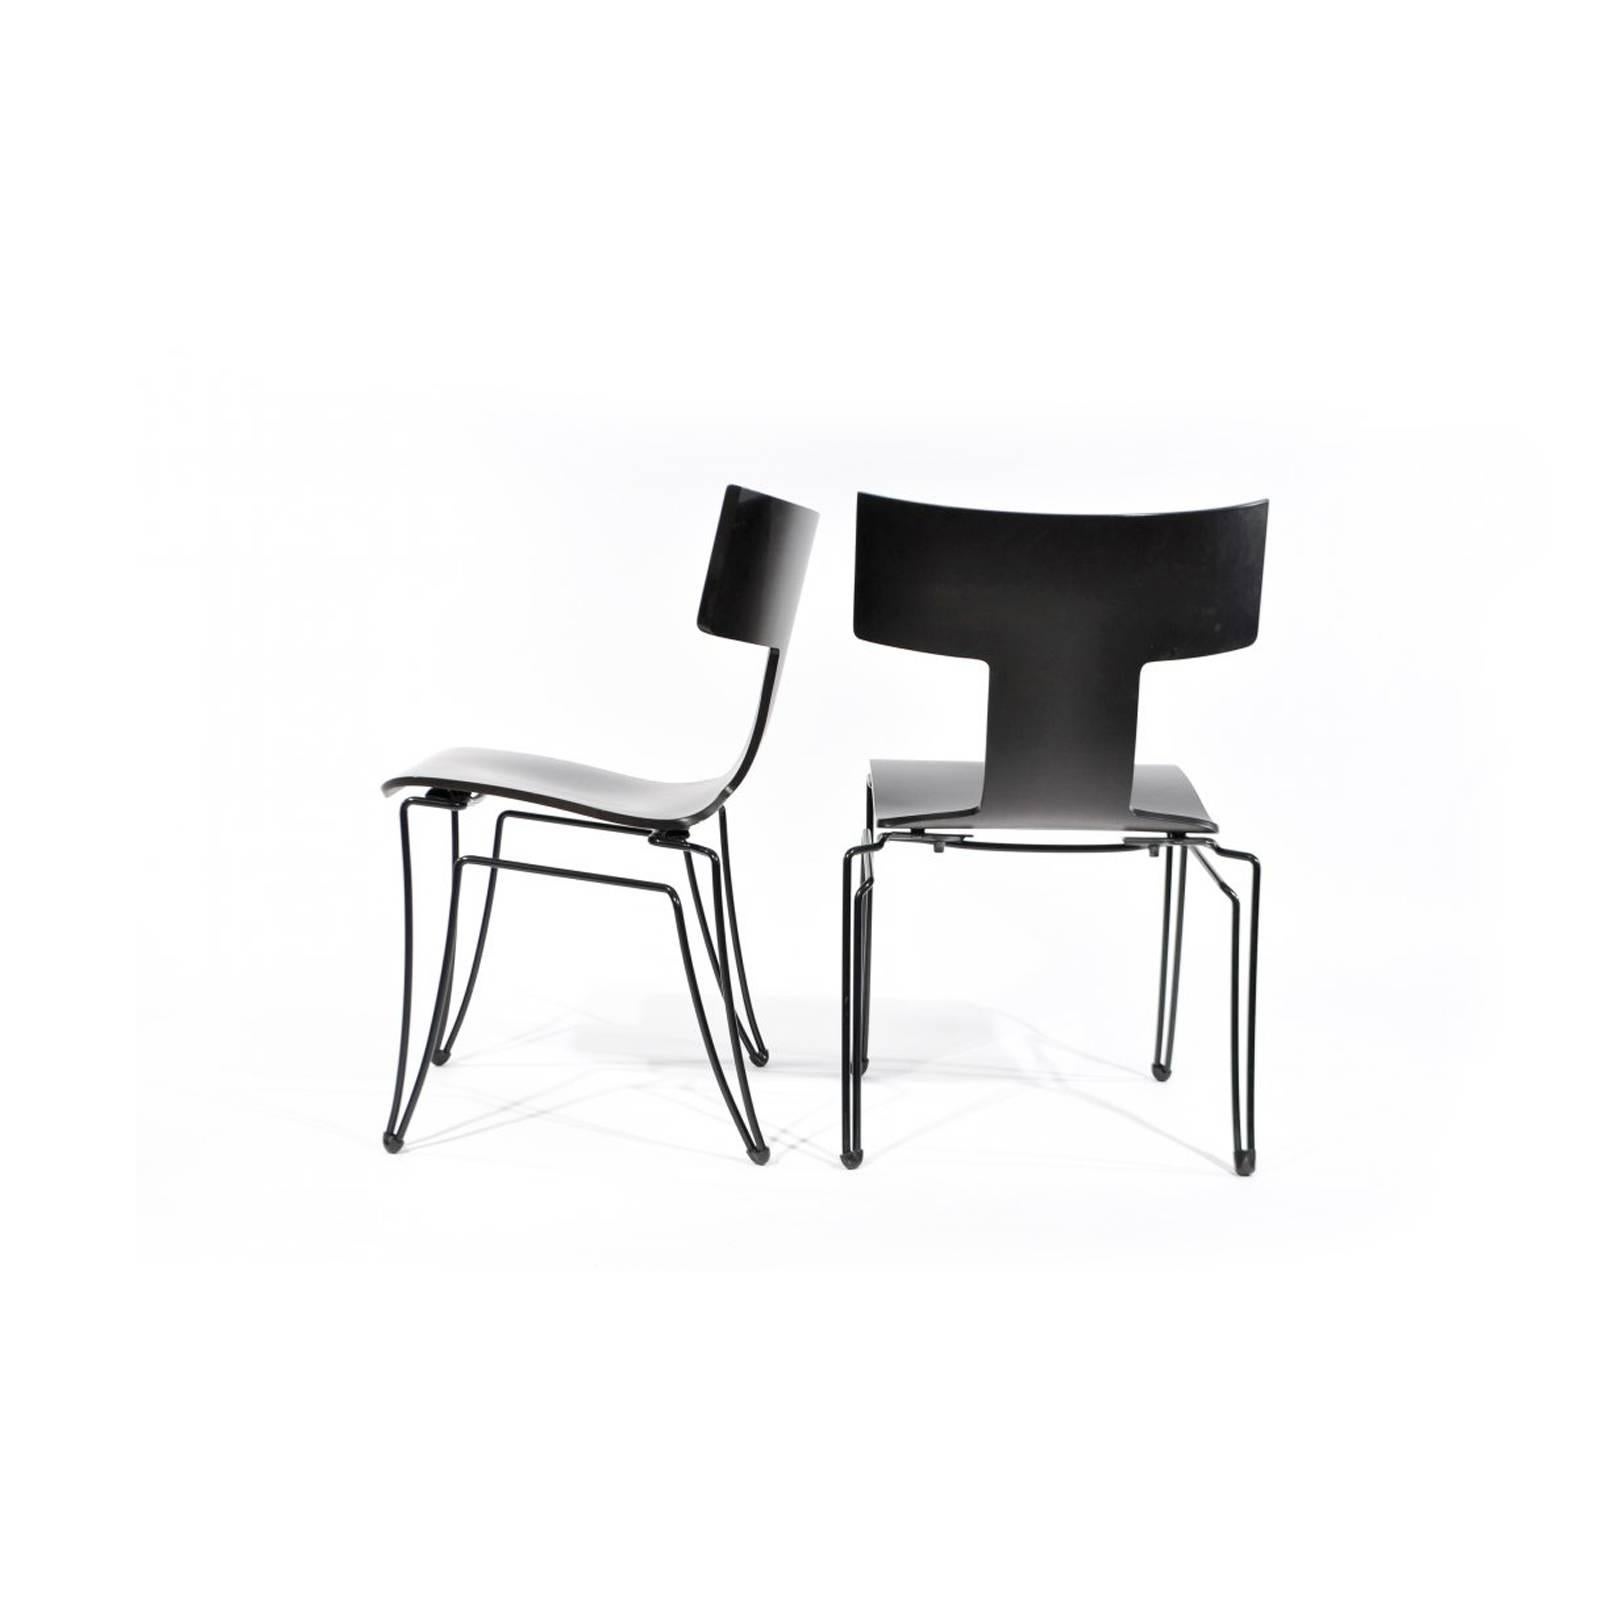 Iconic Anziano chairs by John Hutton for Donghia. The chairs have been refinished and are in mint condition.